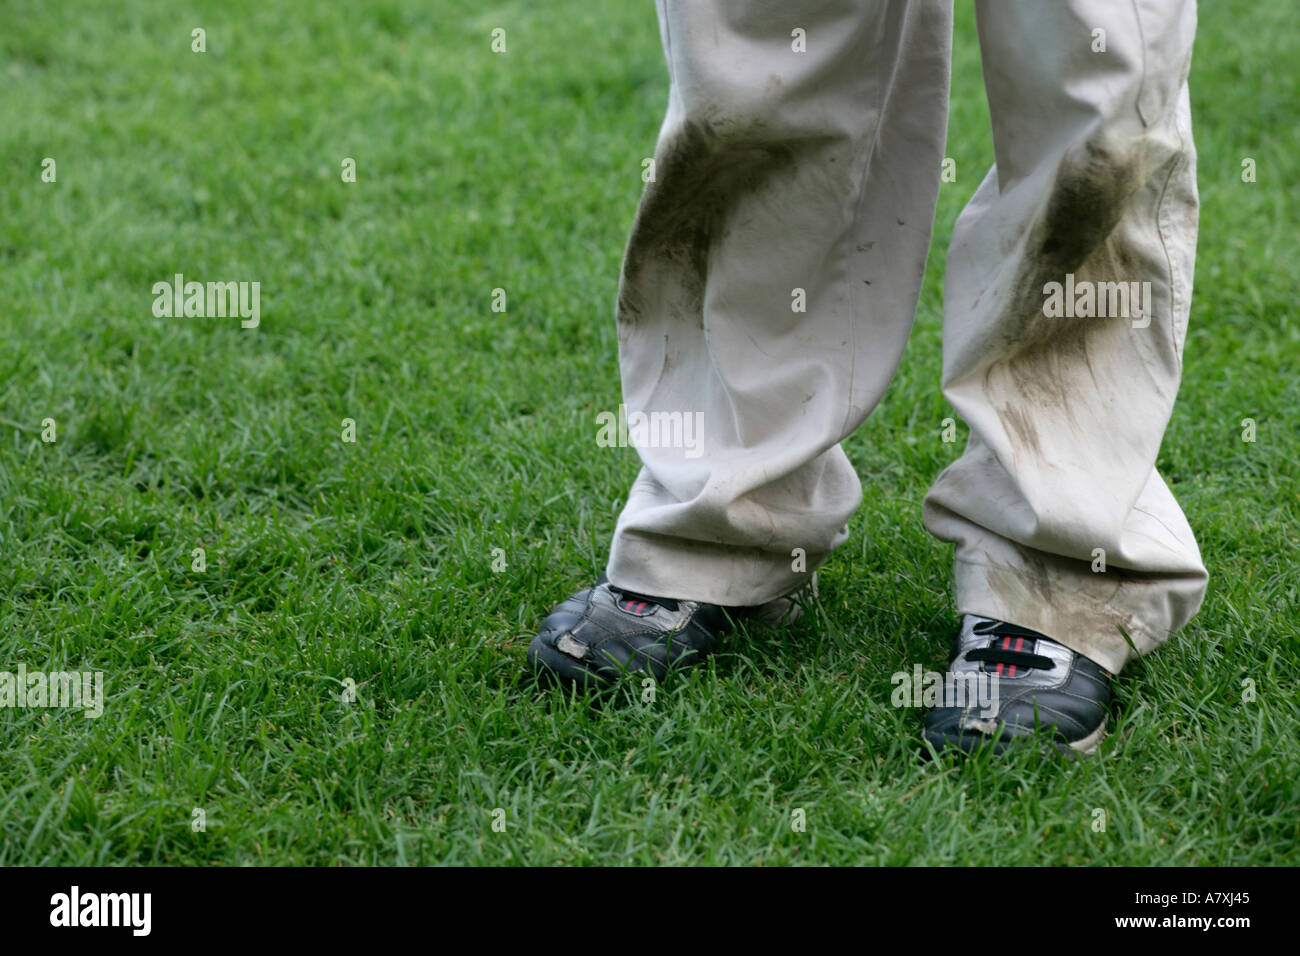 Young boy standing on grass with dirty trousers and trainers Stock ...